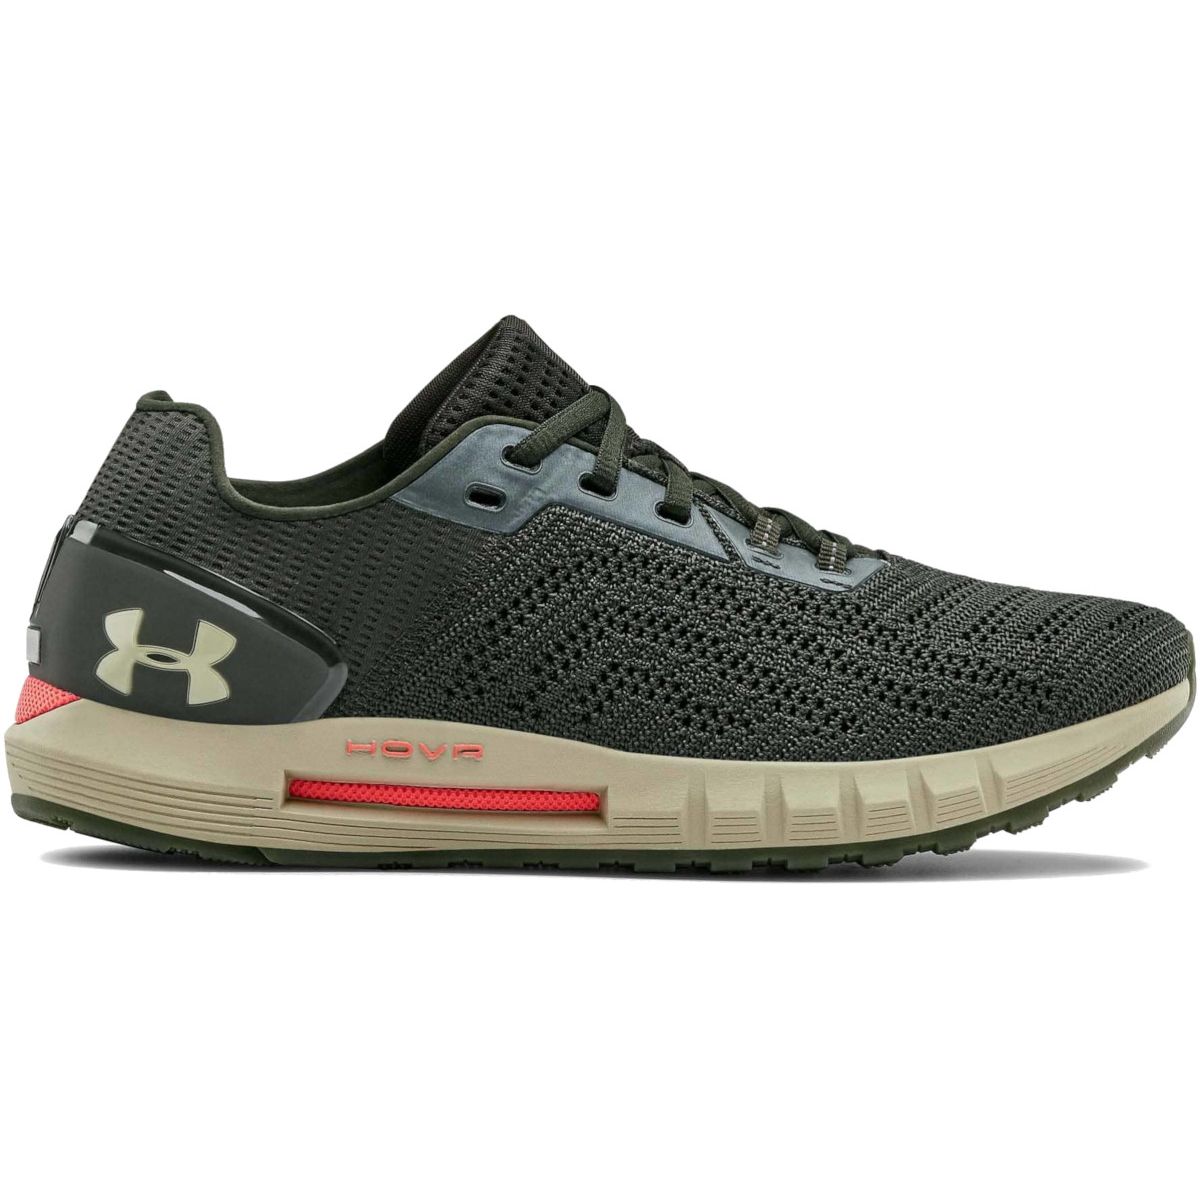 Under Armour Hovr Sonic 2 Men's Running Shoes 3021586-301